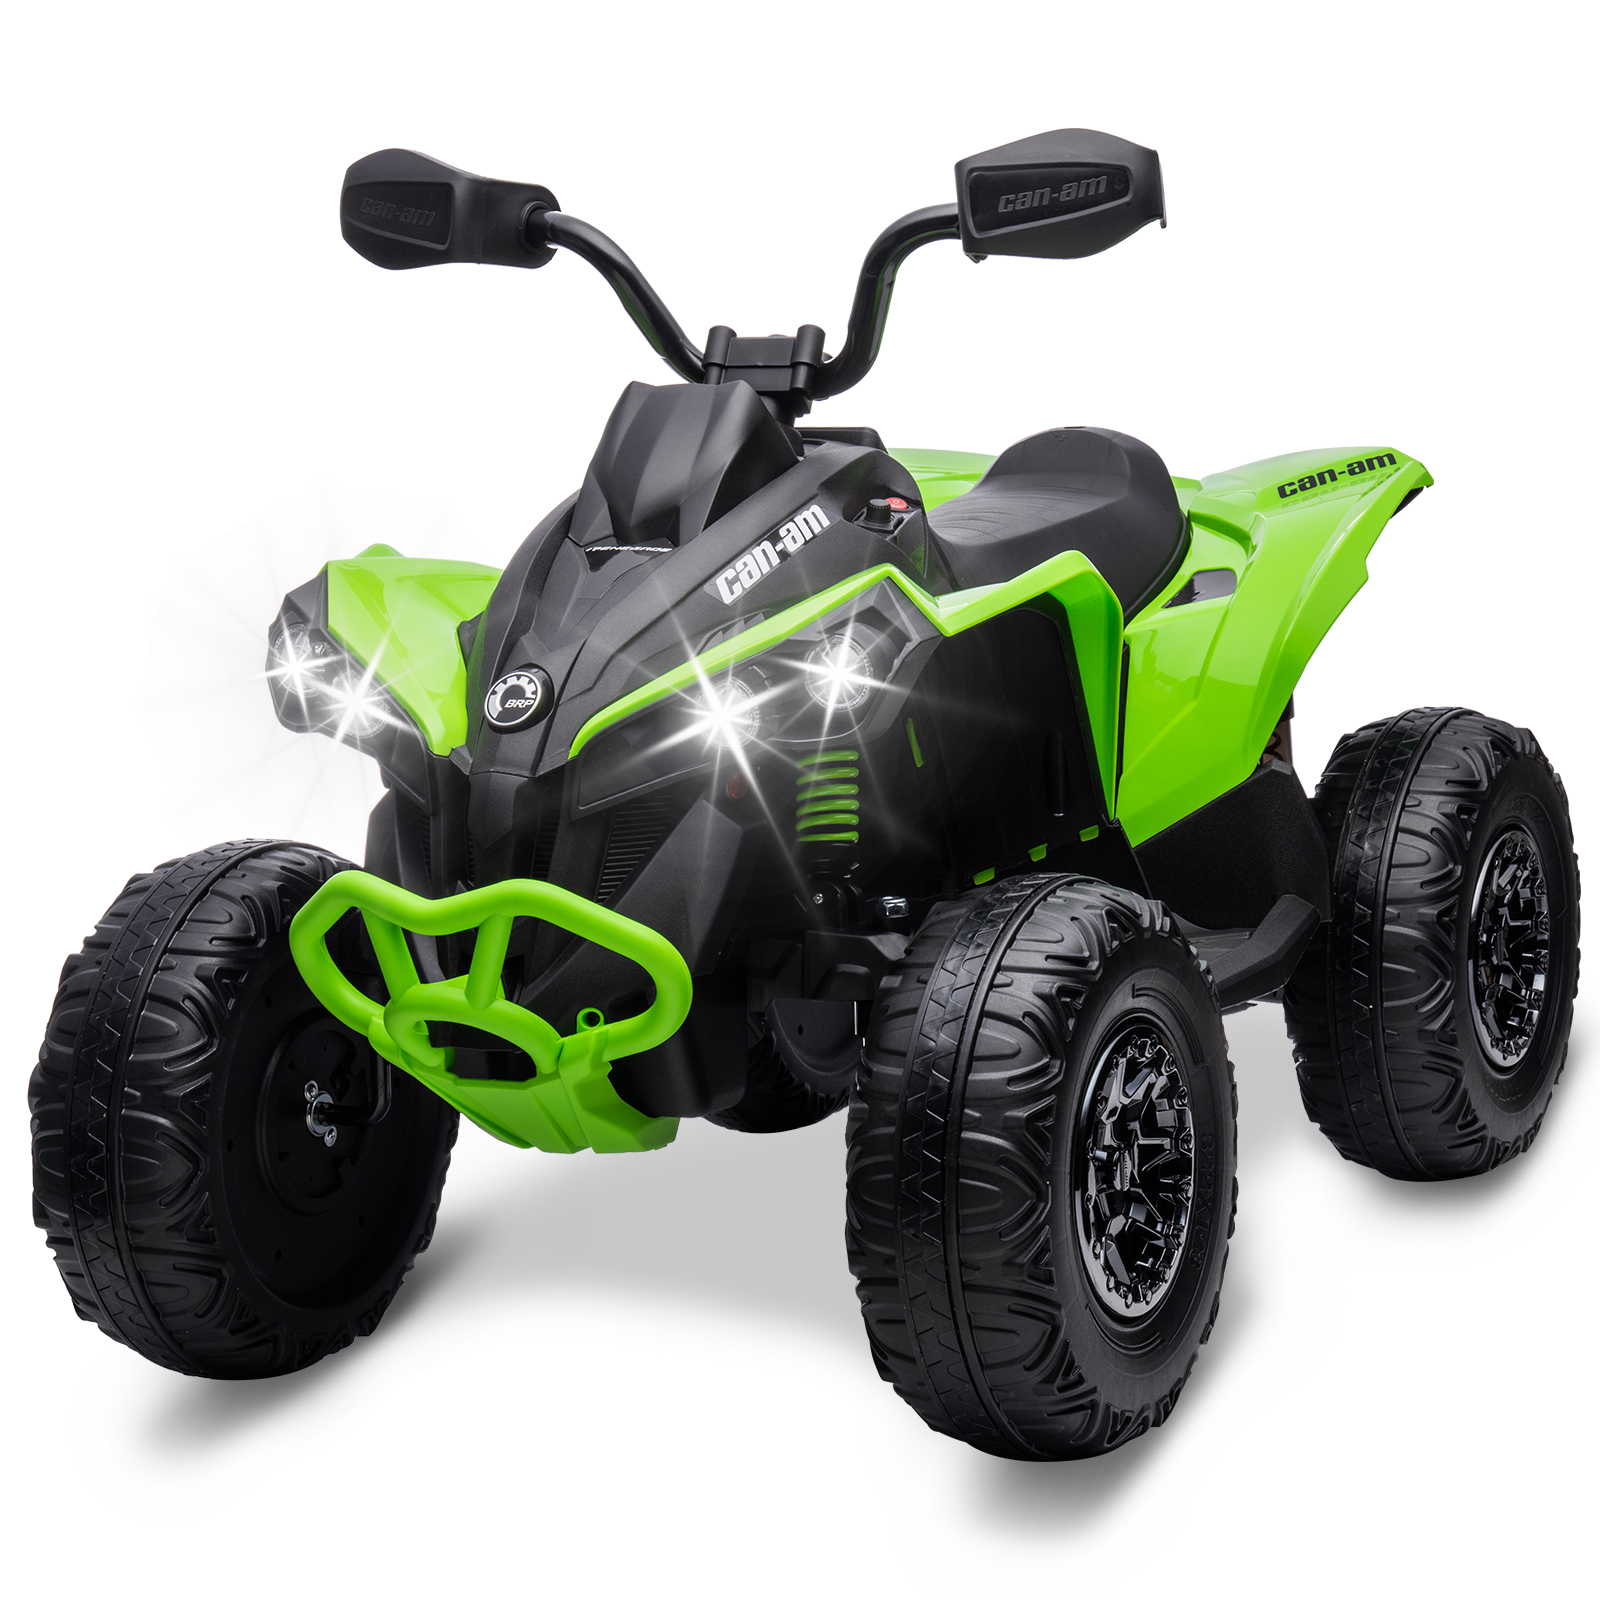 12V Ride on Toy Car Bombardier Licensed DK CA002 12V7AH 2*35W motors ATV Electric Vehicle Best Children's Day Gifts for 3-8 Year Old Boys Girls, Green - image 1 of 7